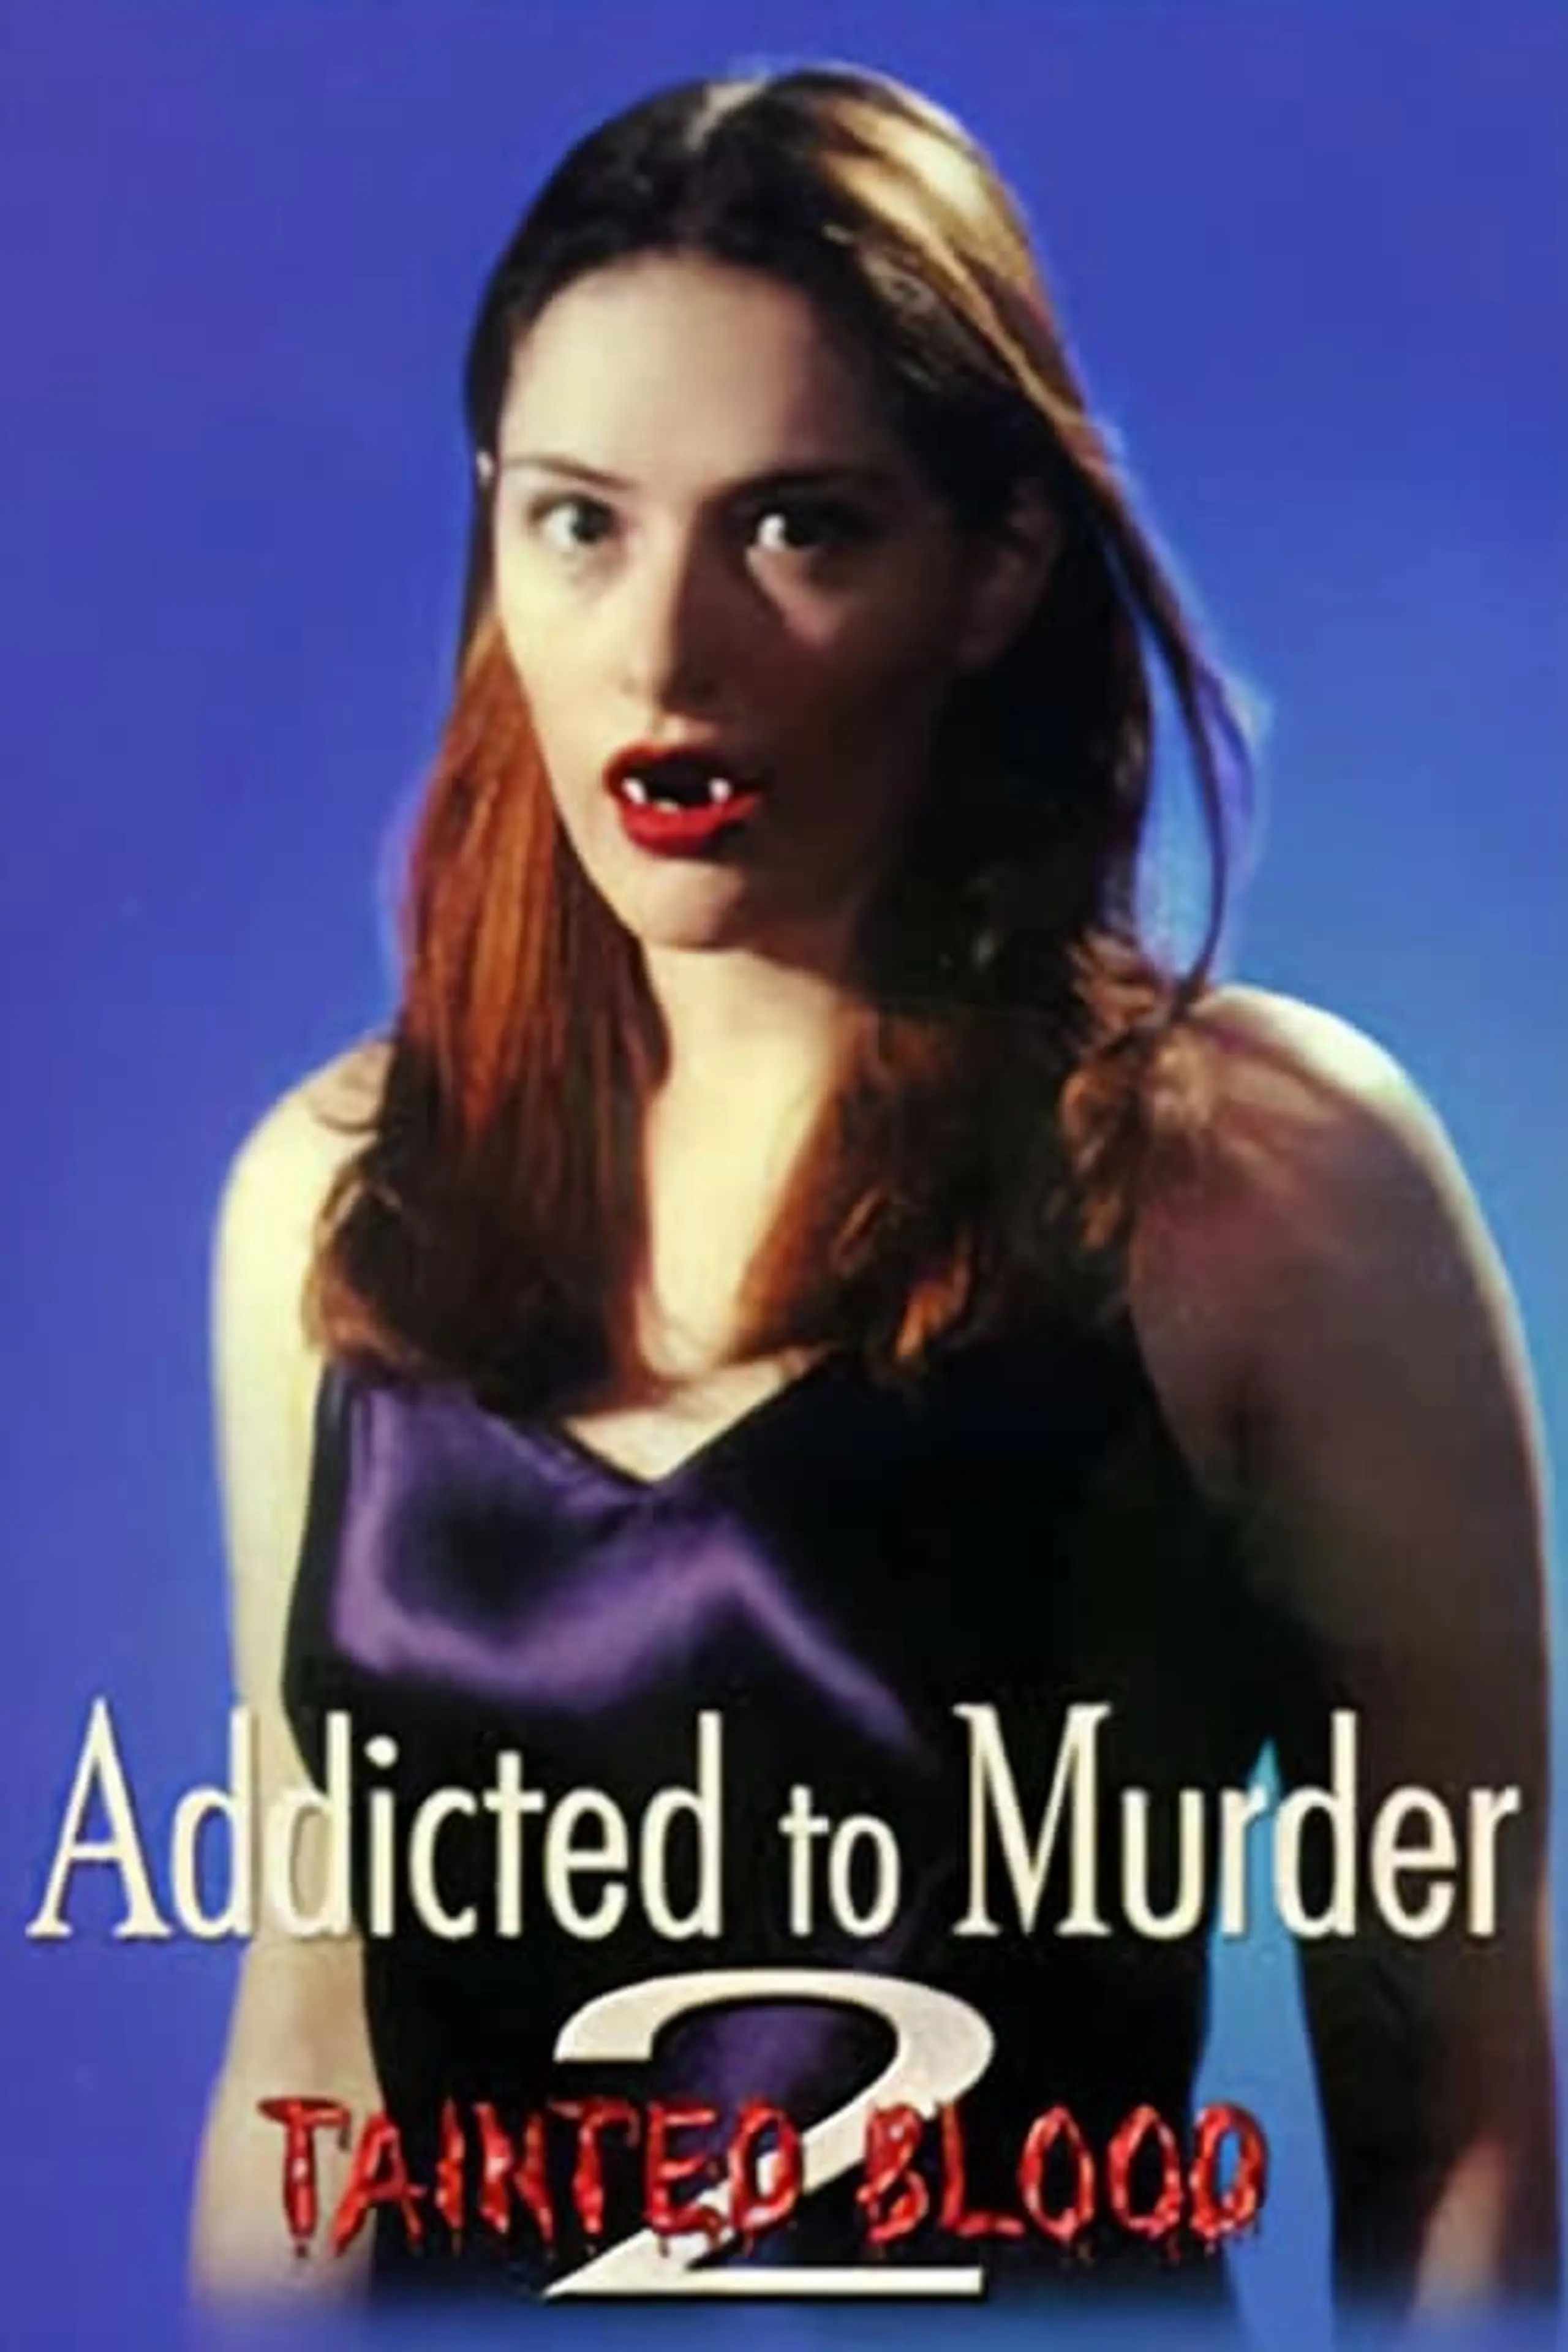 Addicted to Murder 2: Tainted Blood